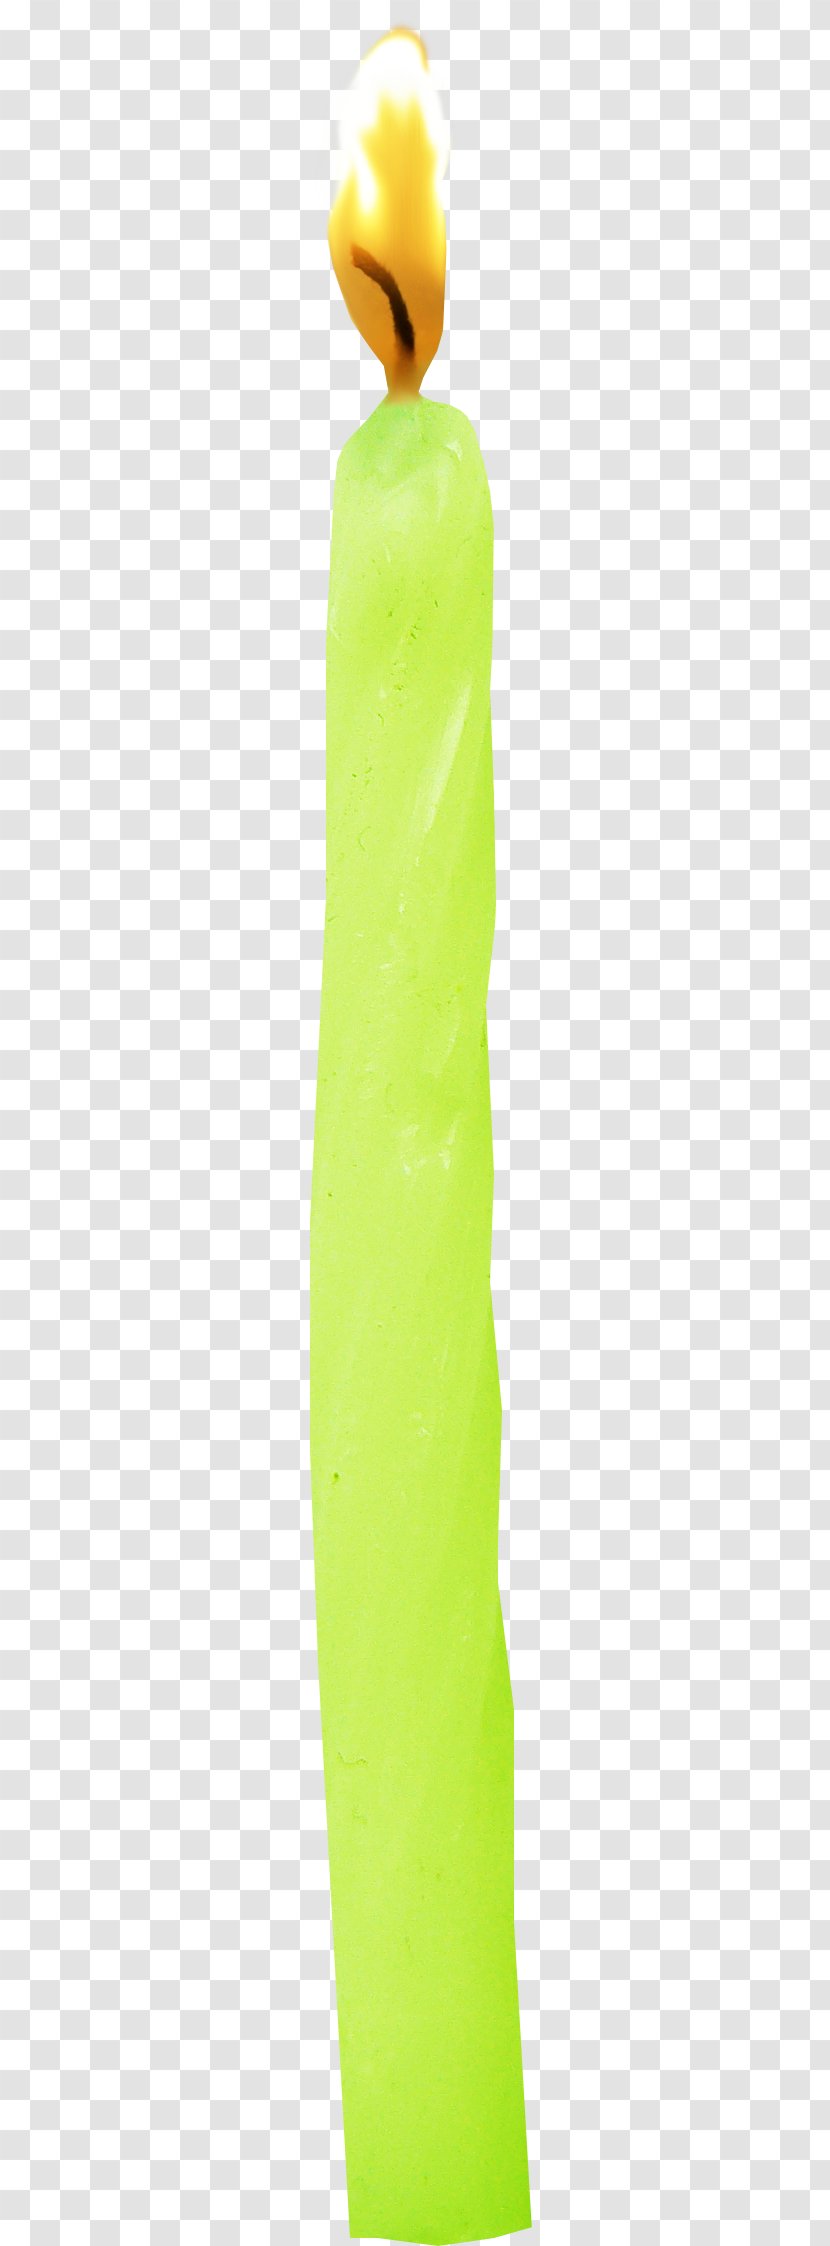 Yellow - Green Candle Transparent PNG